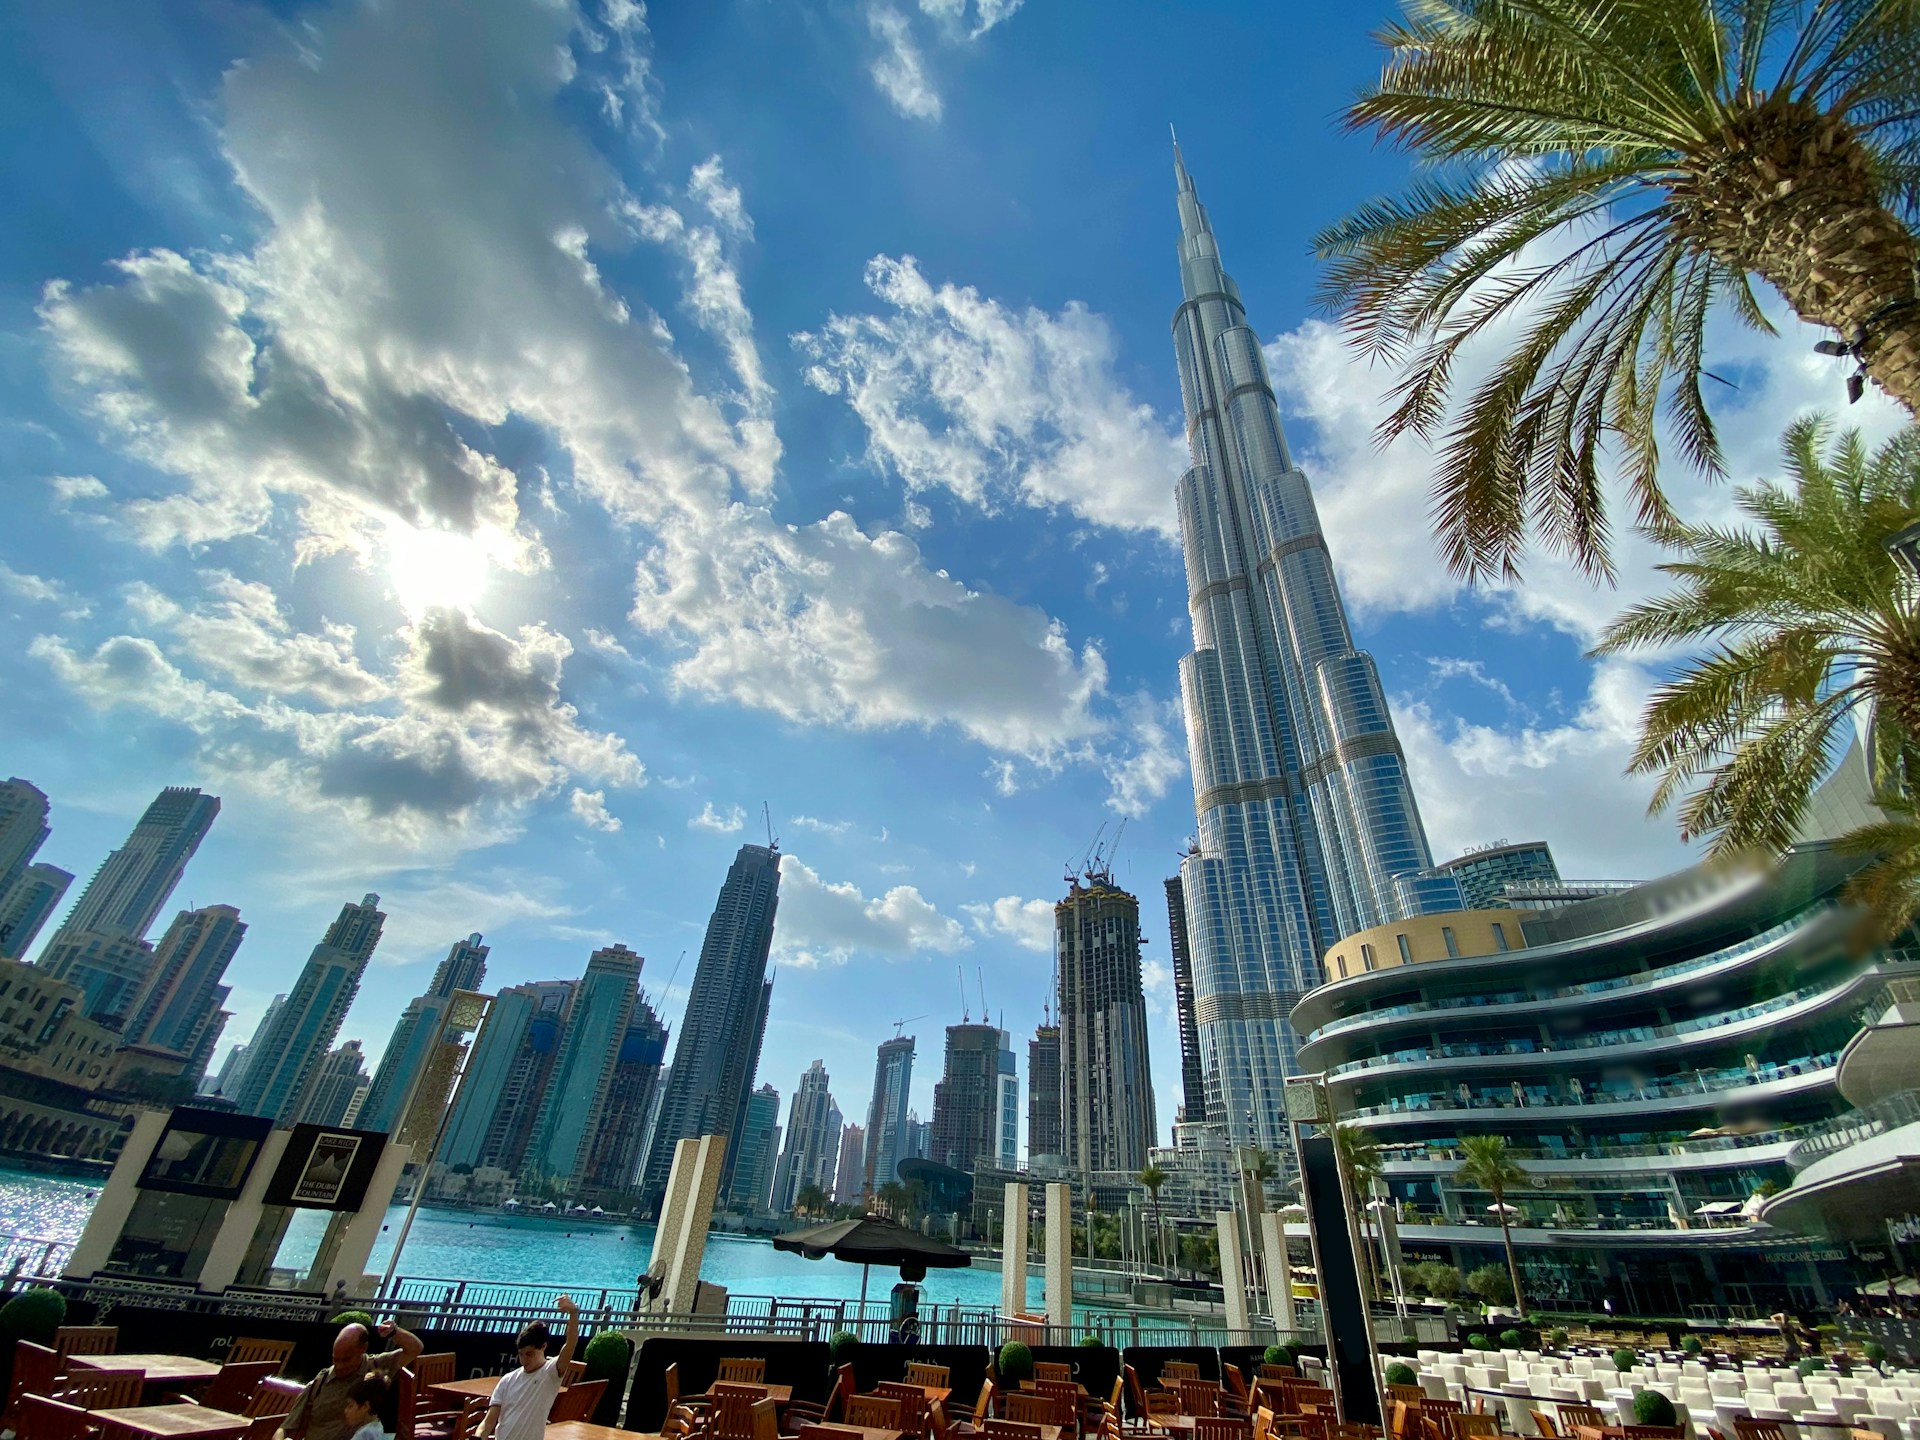 <p>Dubai is popular for its incredible feats of architecture such as the Burj Khalifa, and the Palm Islands. There are also many luxurious shopping malls, and adventurous offerings like desert safaris. It has a unique blend of both modern and traditional Arabian charm.</p>